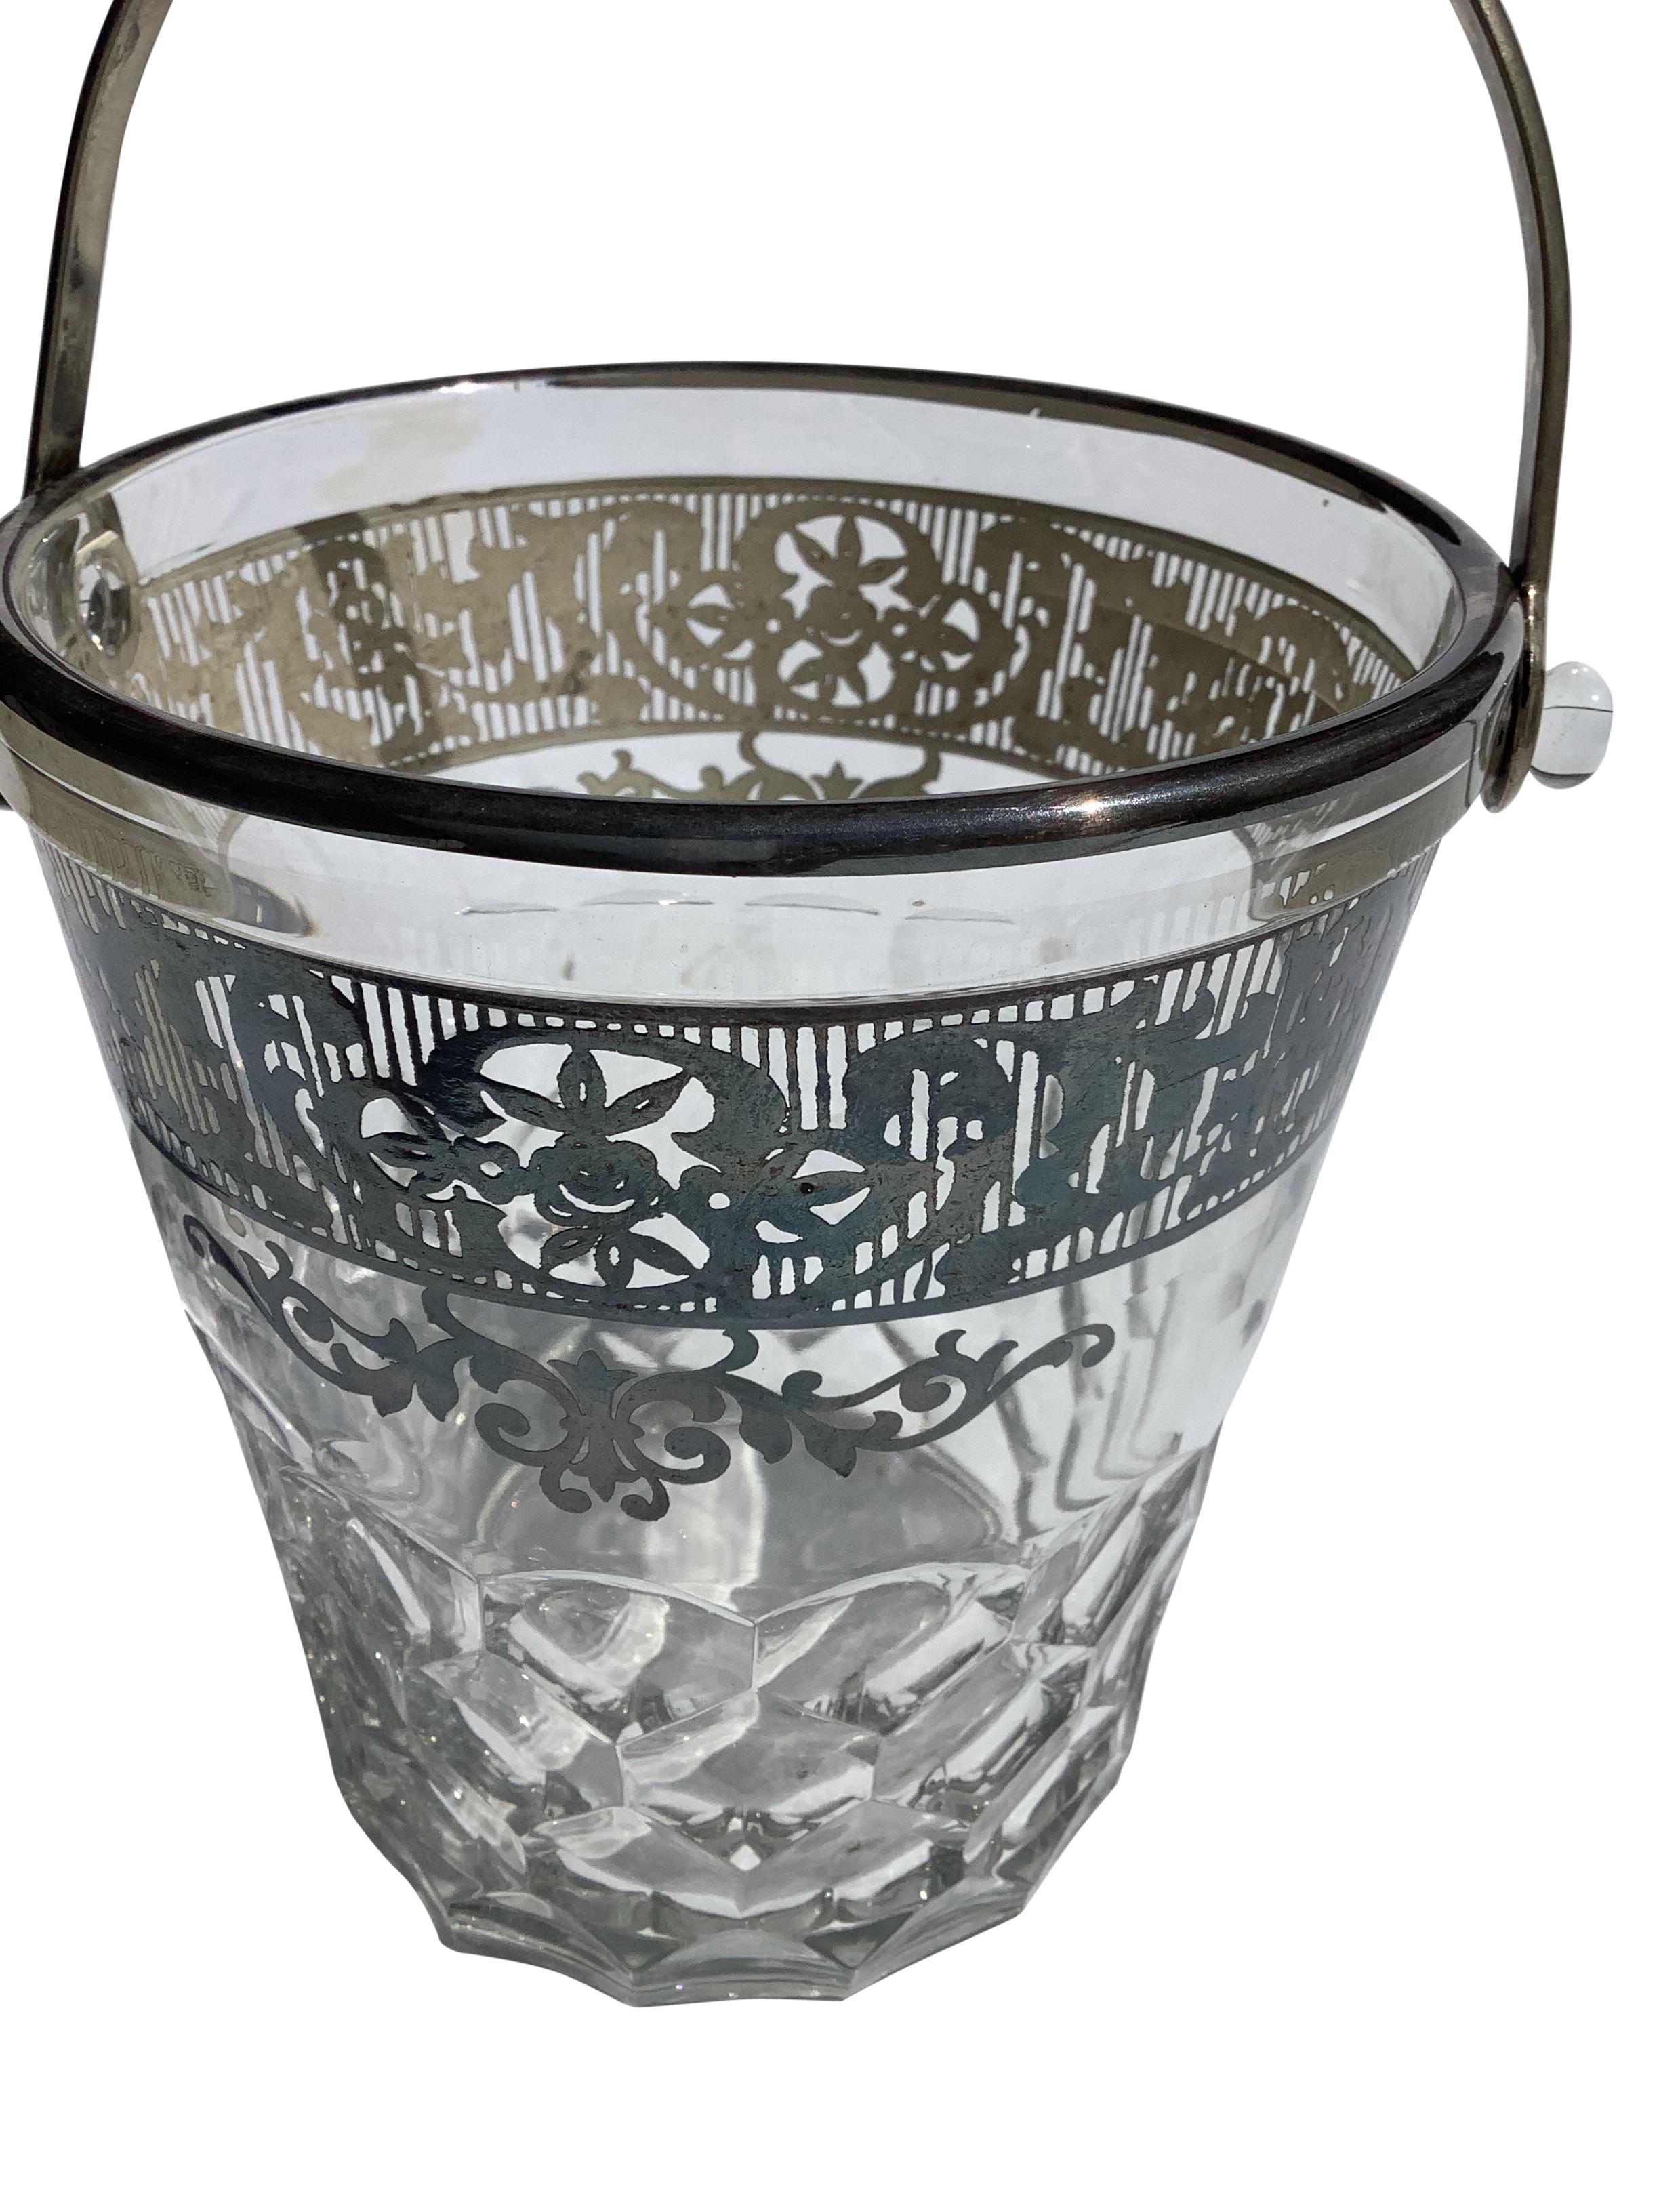 American Art Deco Silver Overlay Ice Bucket For Sale